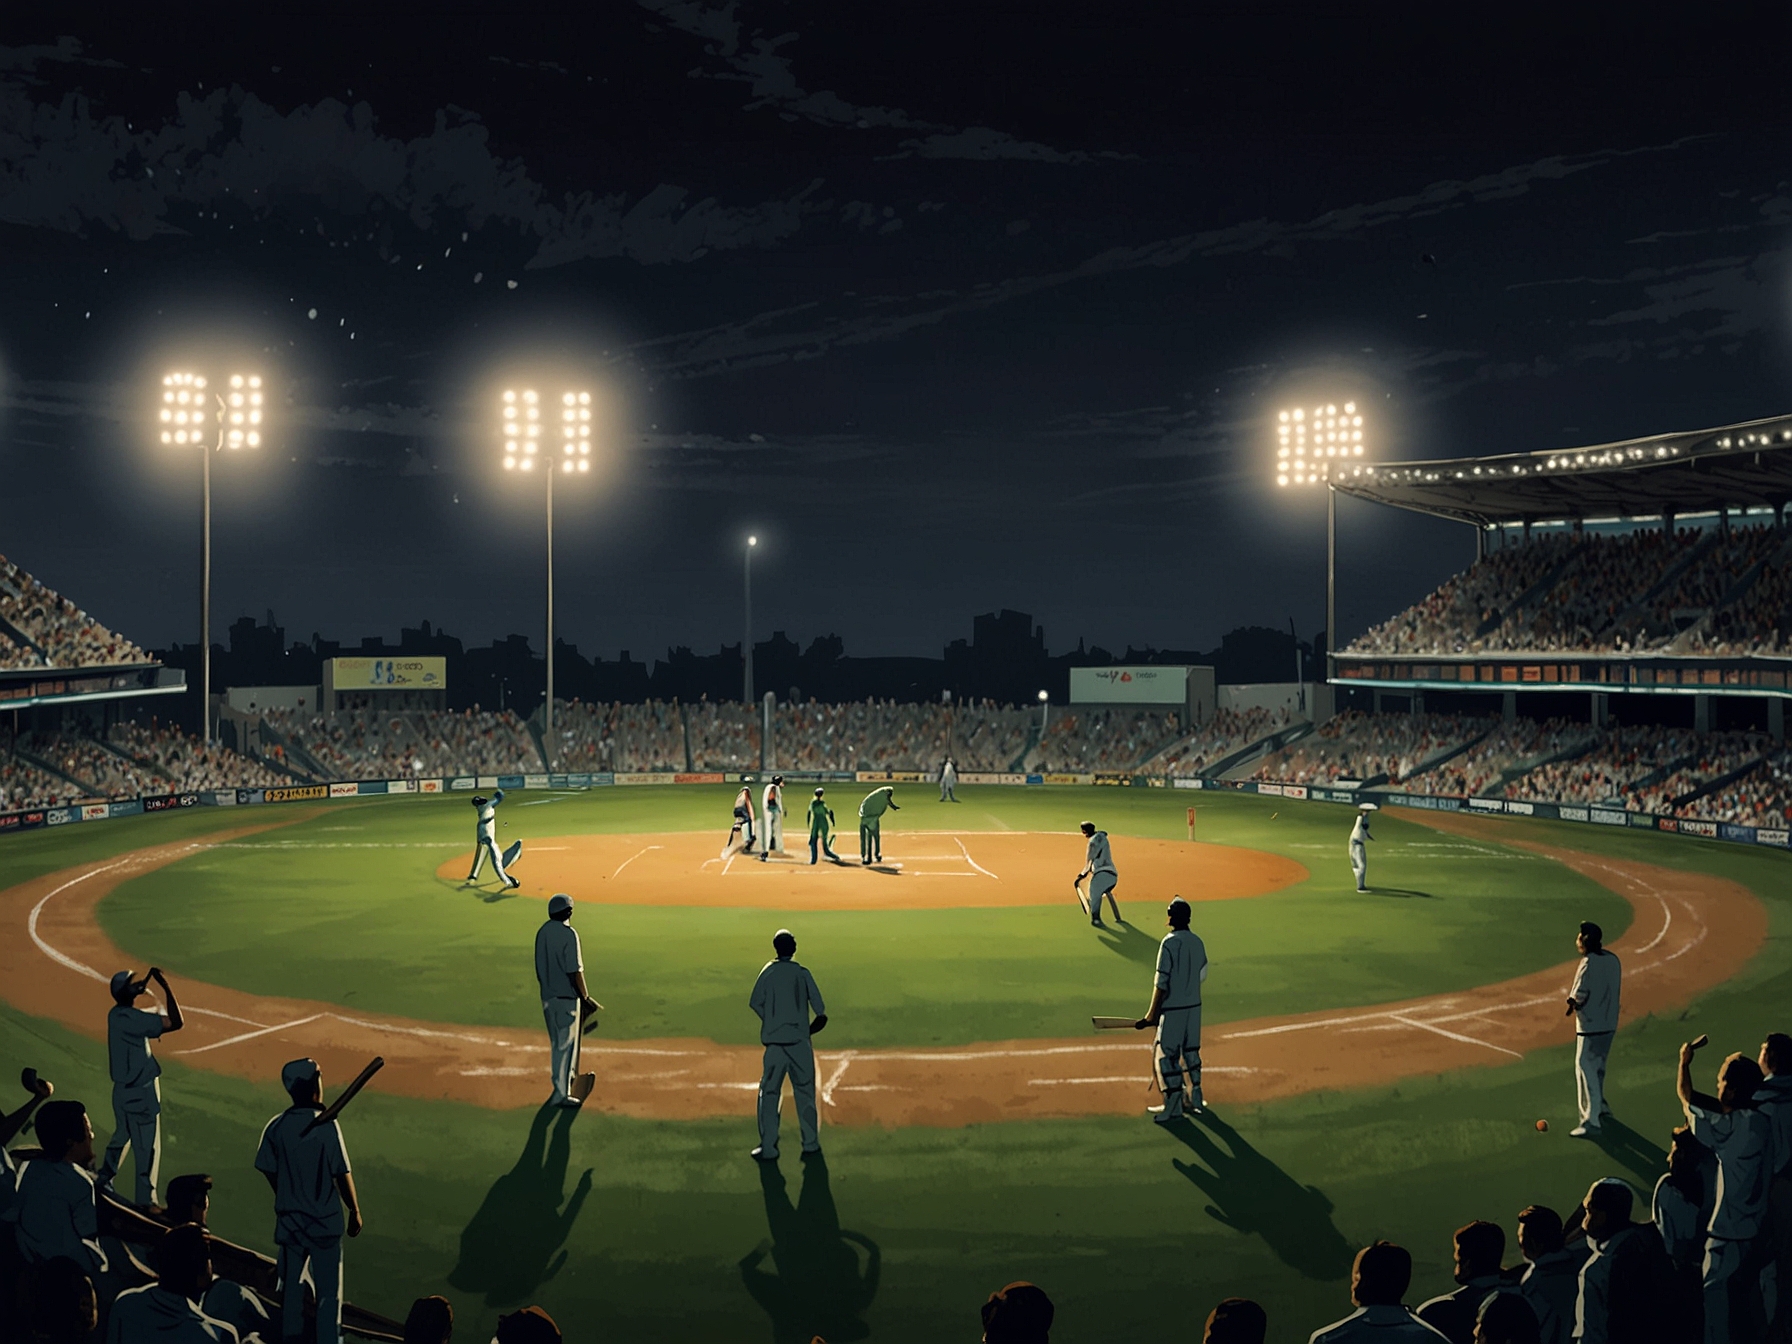 A cricket match illustration showing two teams, Afghanistan and Bangladesh, facing off under a stadium's floodlights, emphasizing the excitement and intensity of the game.